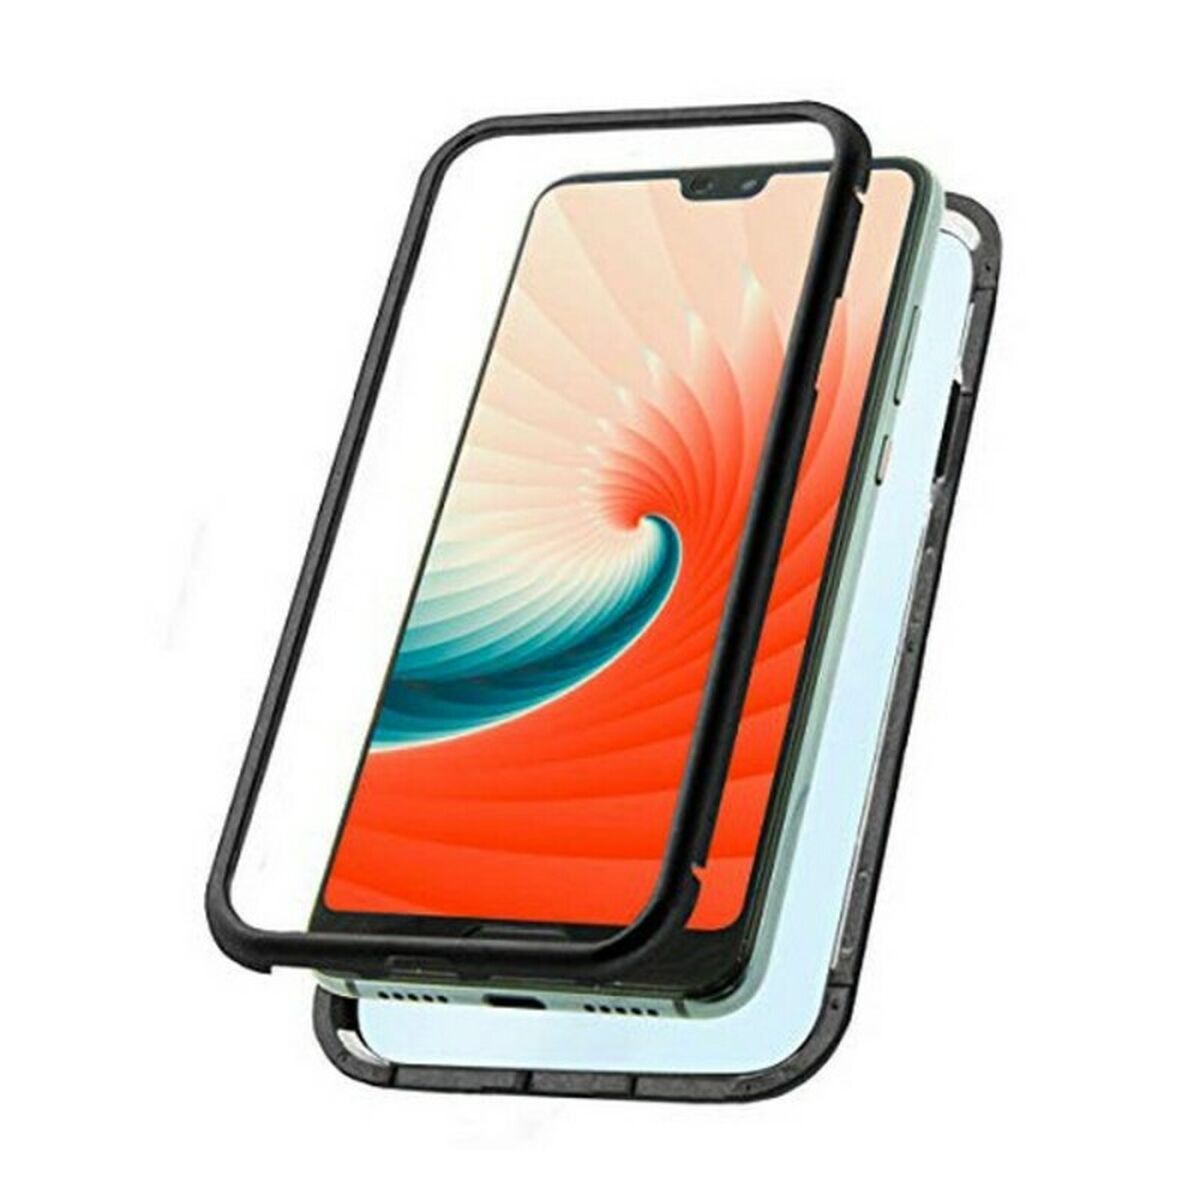 Mobile cover iPhone XR KSIX 1 Transparent Iphone XR